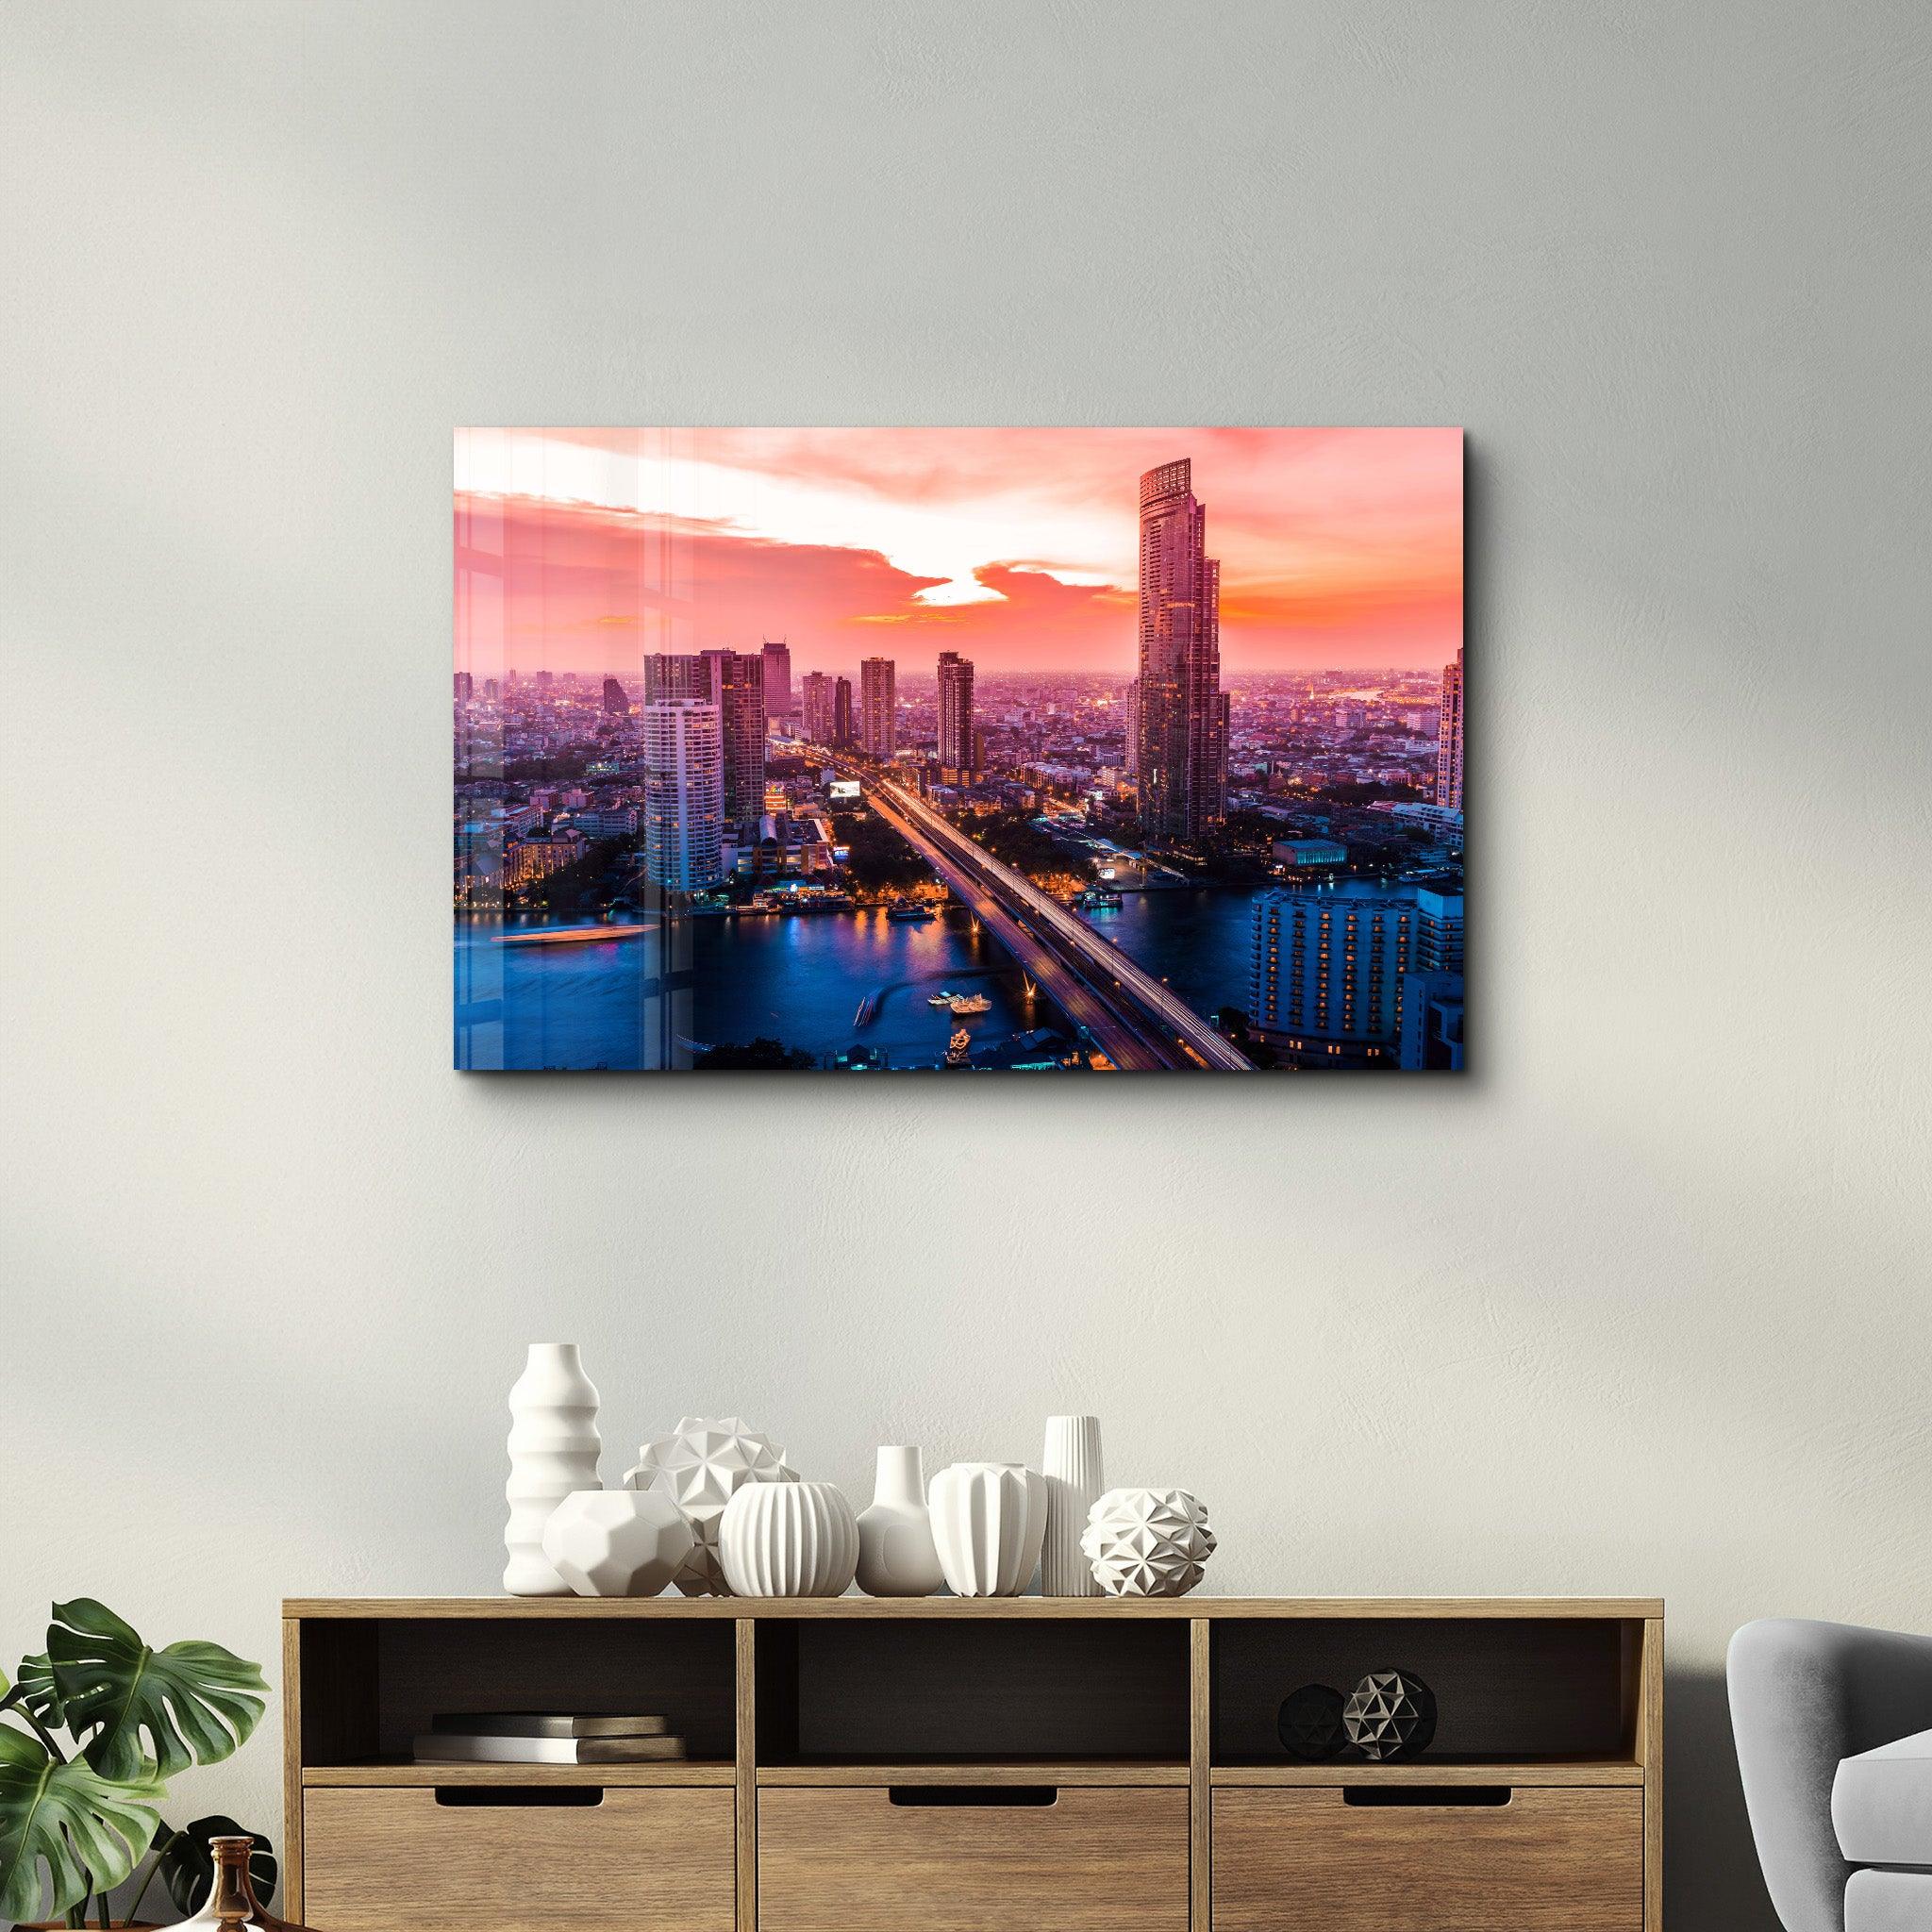 Beautiful cityscape Bangkok business district and residential. In the twilight, Thailand | Glass Wall Art - ArtDesigna Glass Printing Wall Art